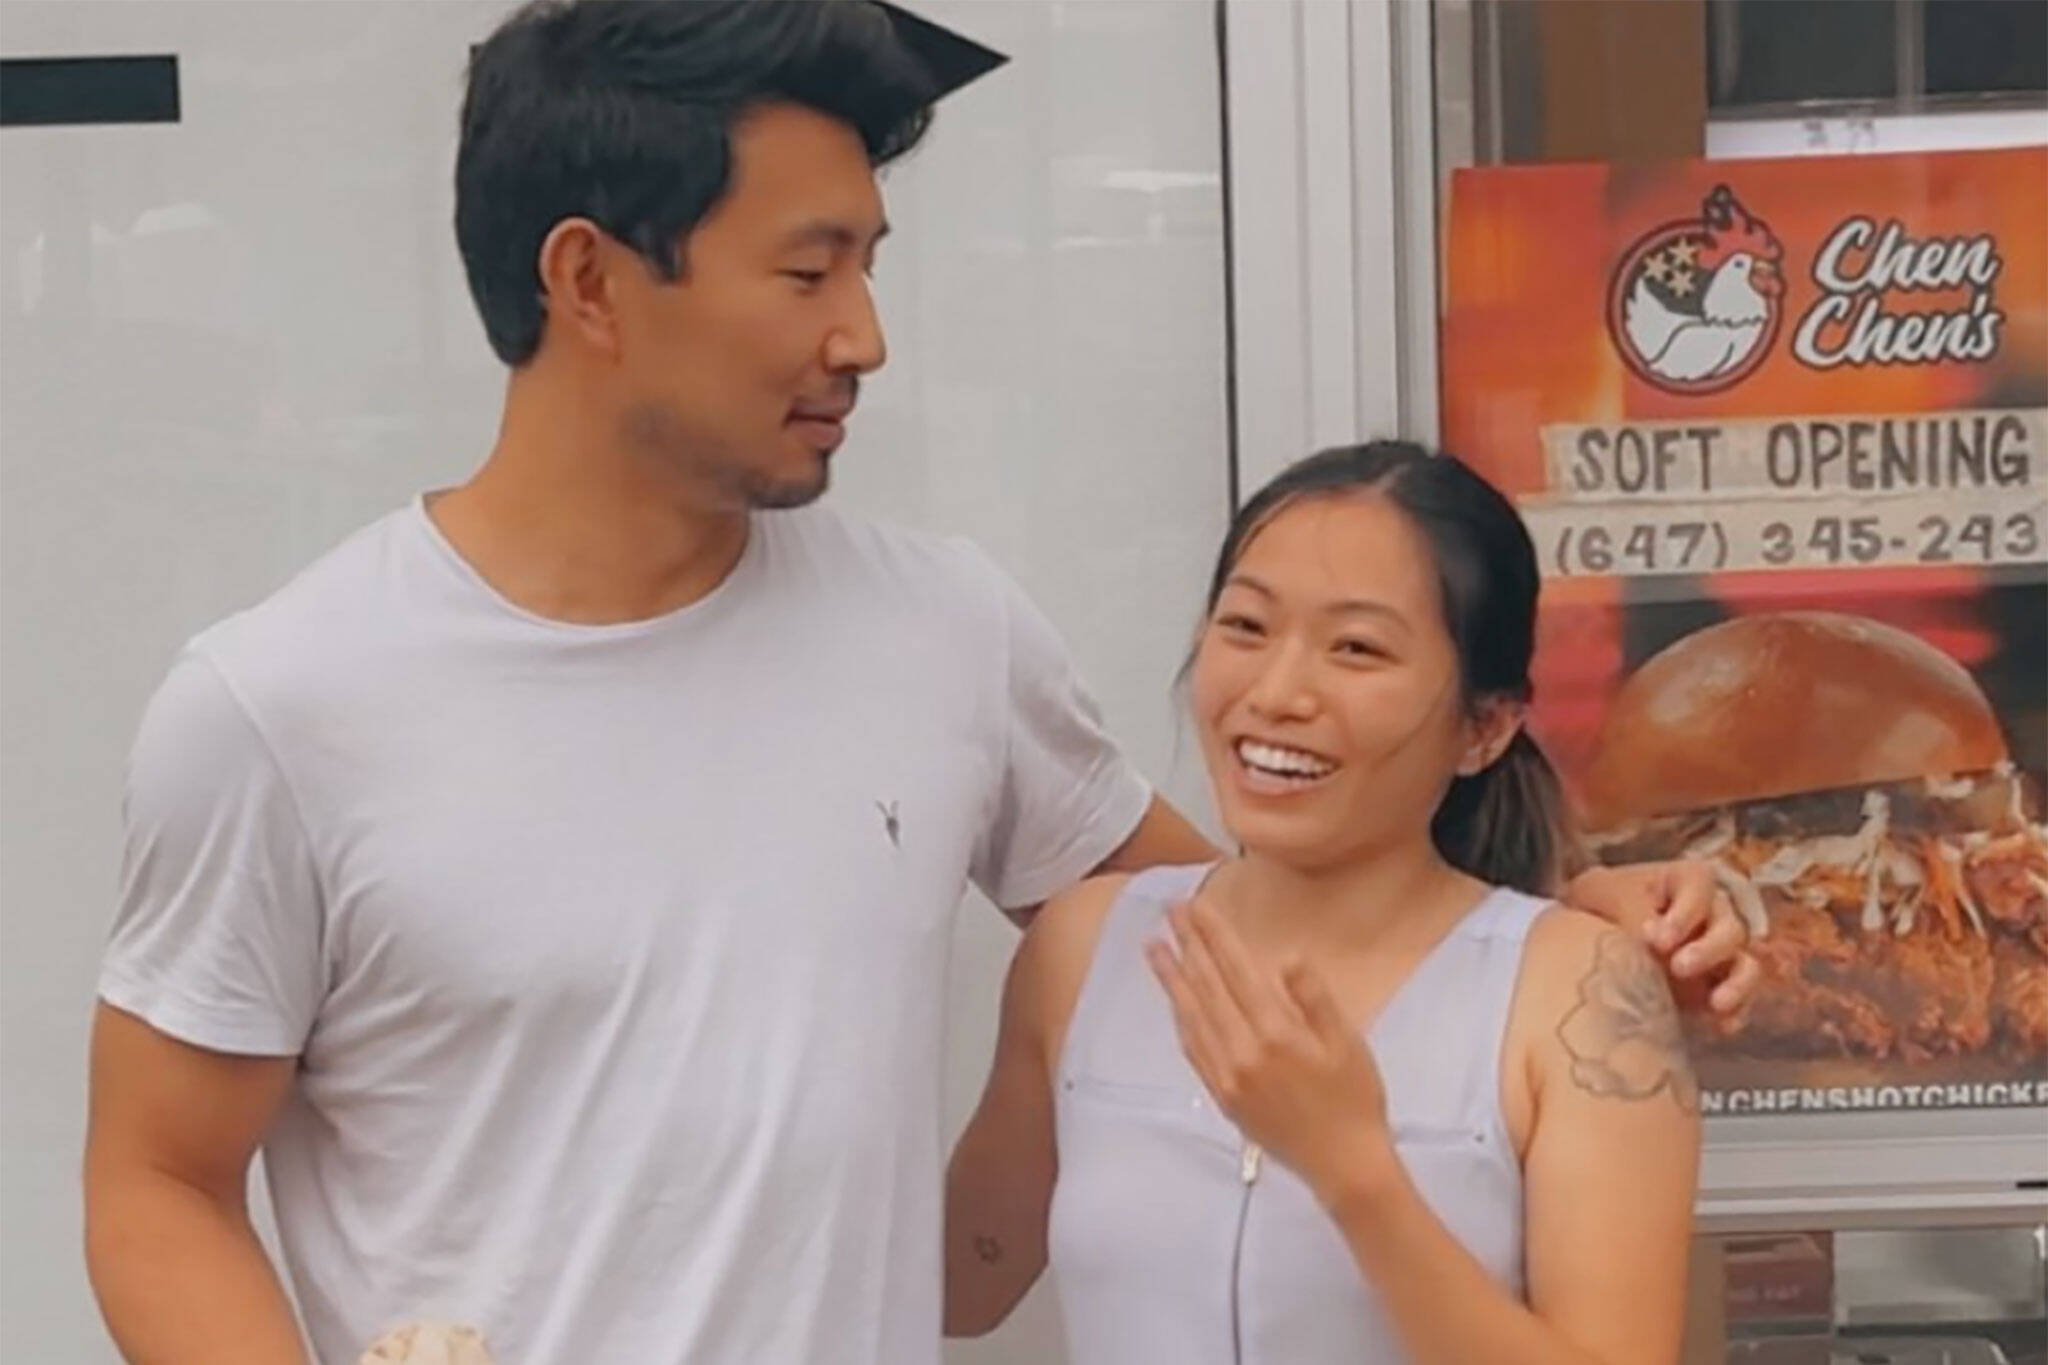 Toronto restaurant can't contain excitement after Simu Liu orders sandwich